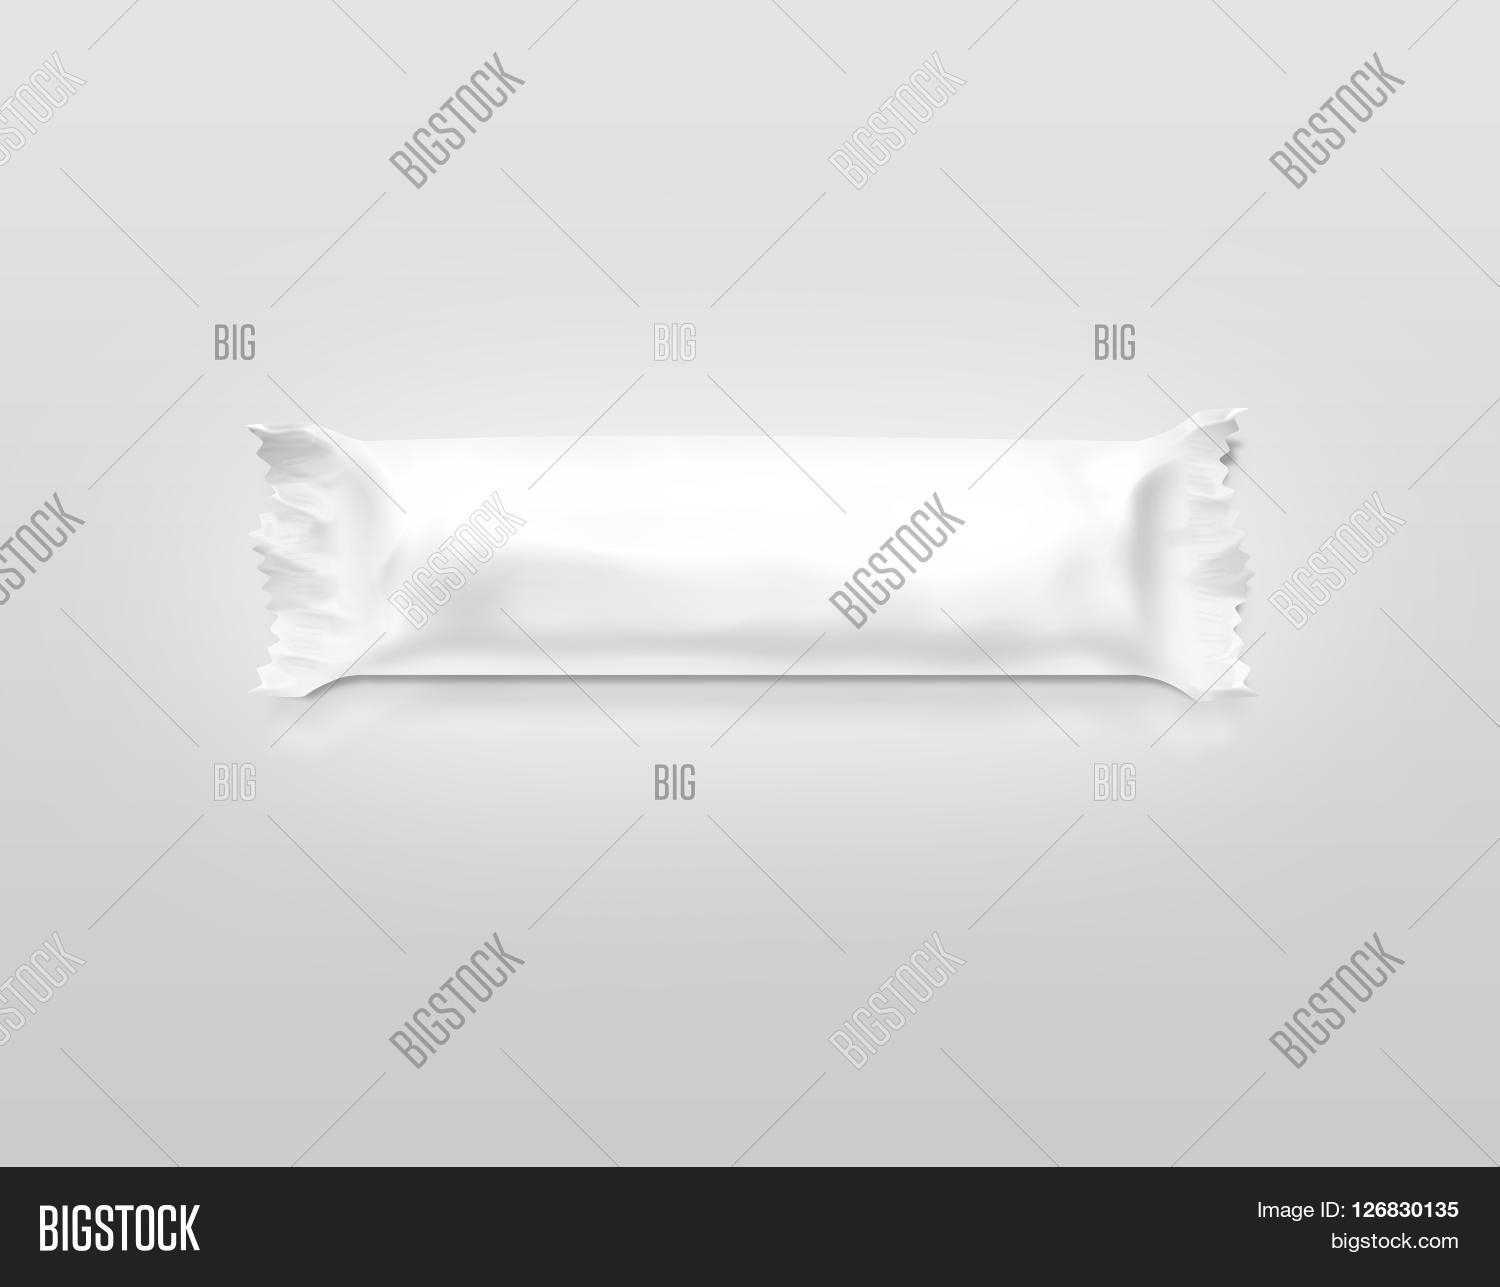 Blank White Candy Bar Image & Photo (Free Trial) | Bigstock With Blank Candy Bar Wrapper Template